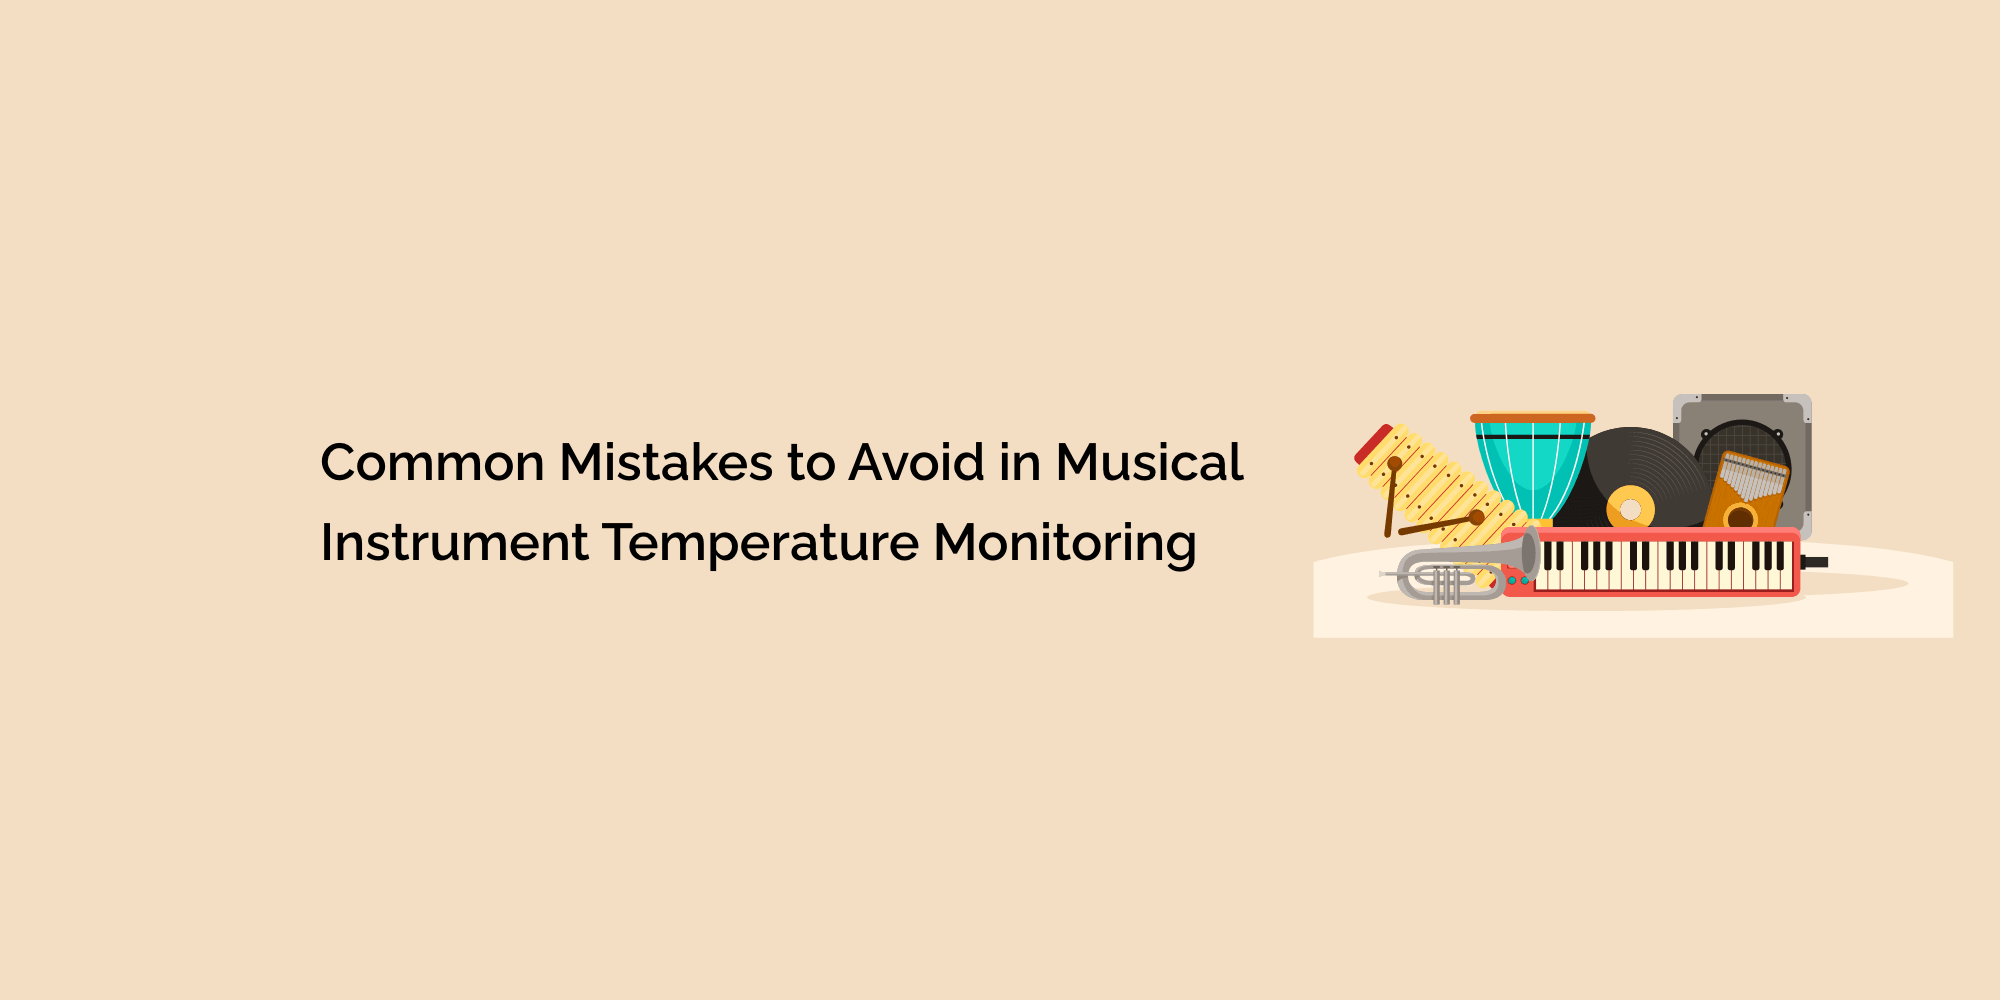 Common Mistakes to Avoid in Musical Instrument Temperature Monitoring